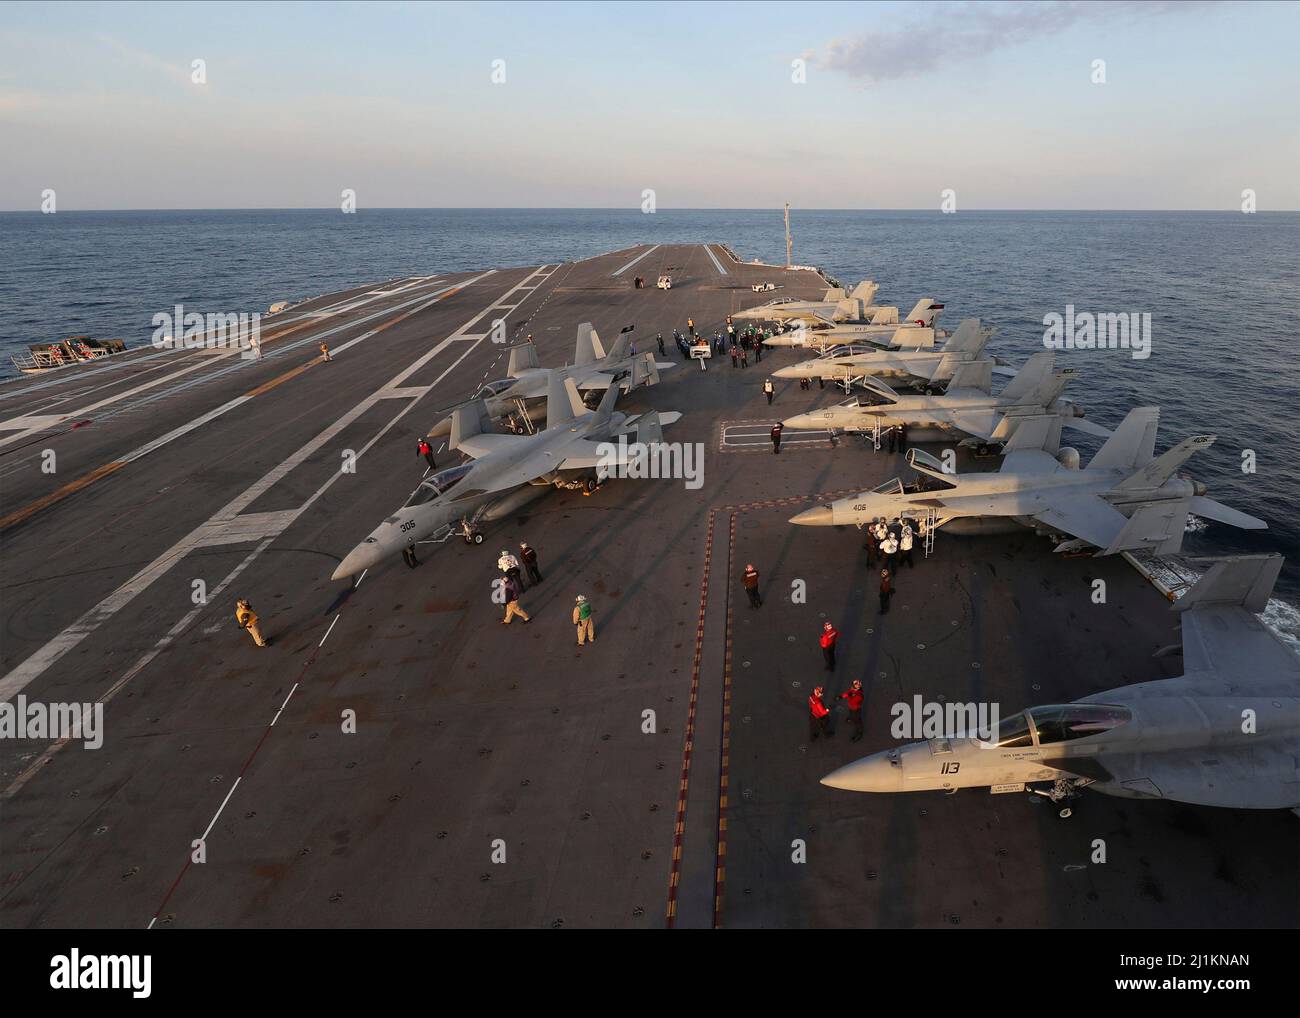 Atlantic Ocean, United States. 24 March, 2022. The U.S. Navy F/A-18 Super Hornet fighter aircraft attached to Carrier Air Wing 8 are positioned on the flight deck of the Ford-class aircraft carrier USS Gerald R. Ford underway during certification and qualifications, March 24, 2022 in the Atlantic Ocean.  Credit: MC2 Nolan Pennington/Planetpix/Alamy Live News Stock Photo